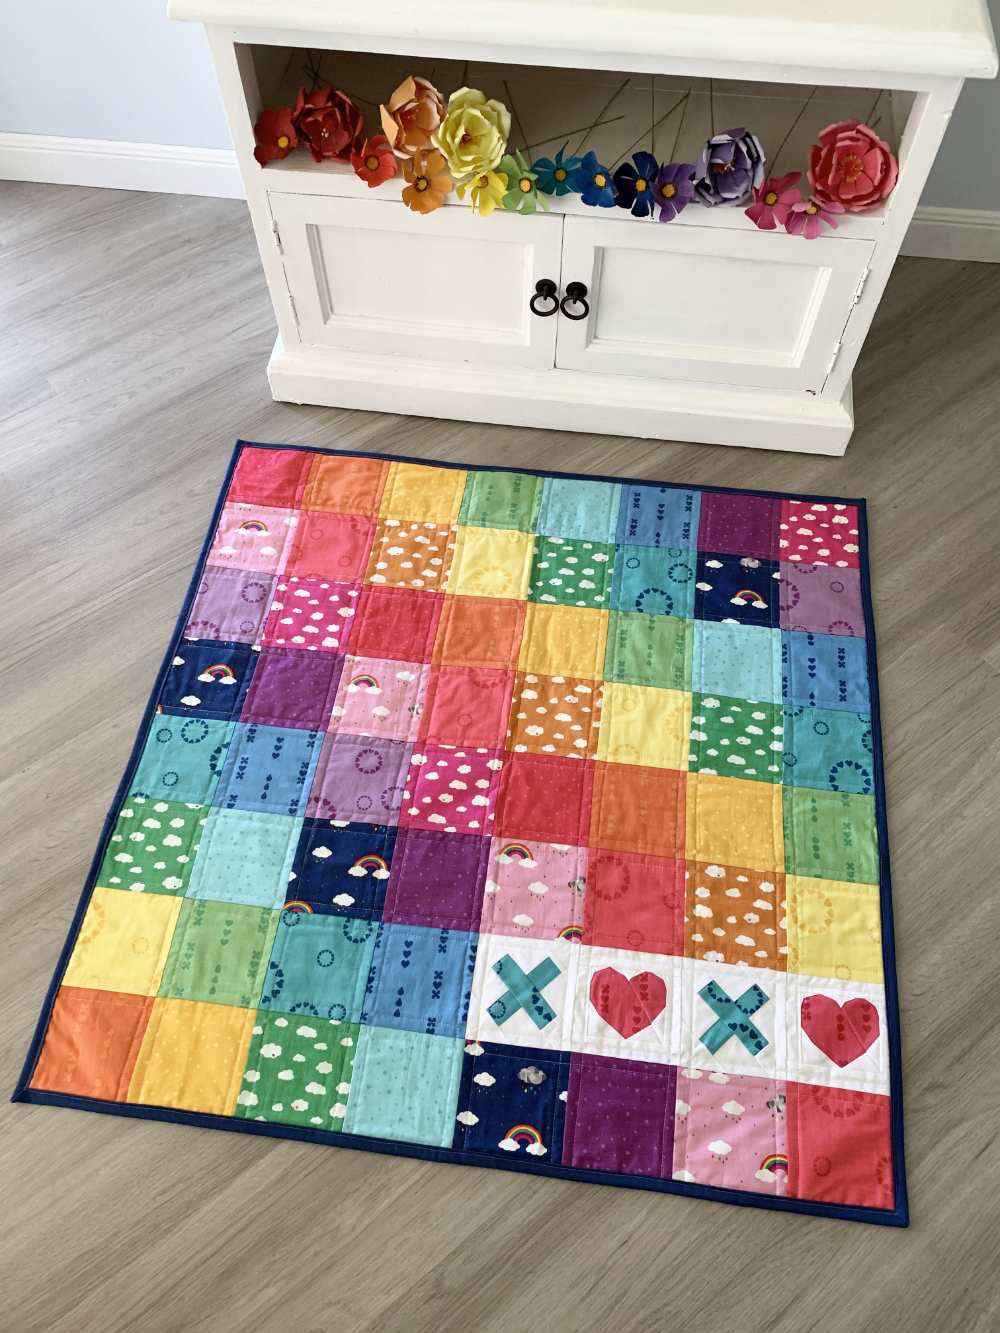 XOXO paper pieced quilt pattern in rainbow sewn in bright fabrics